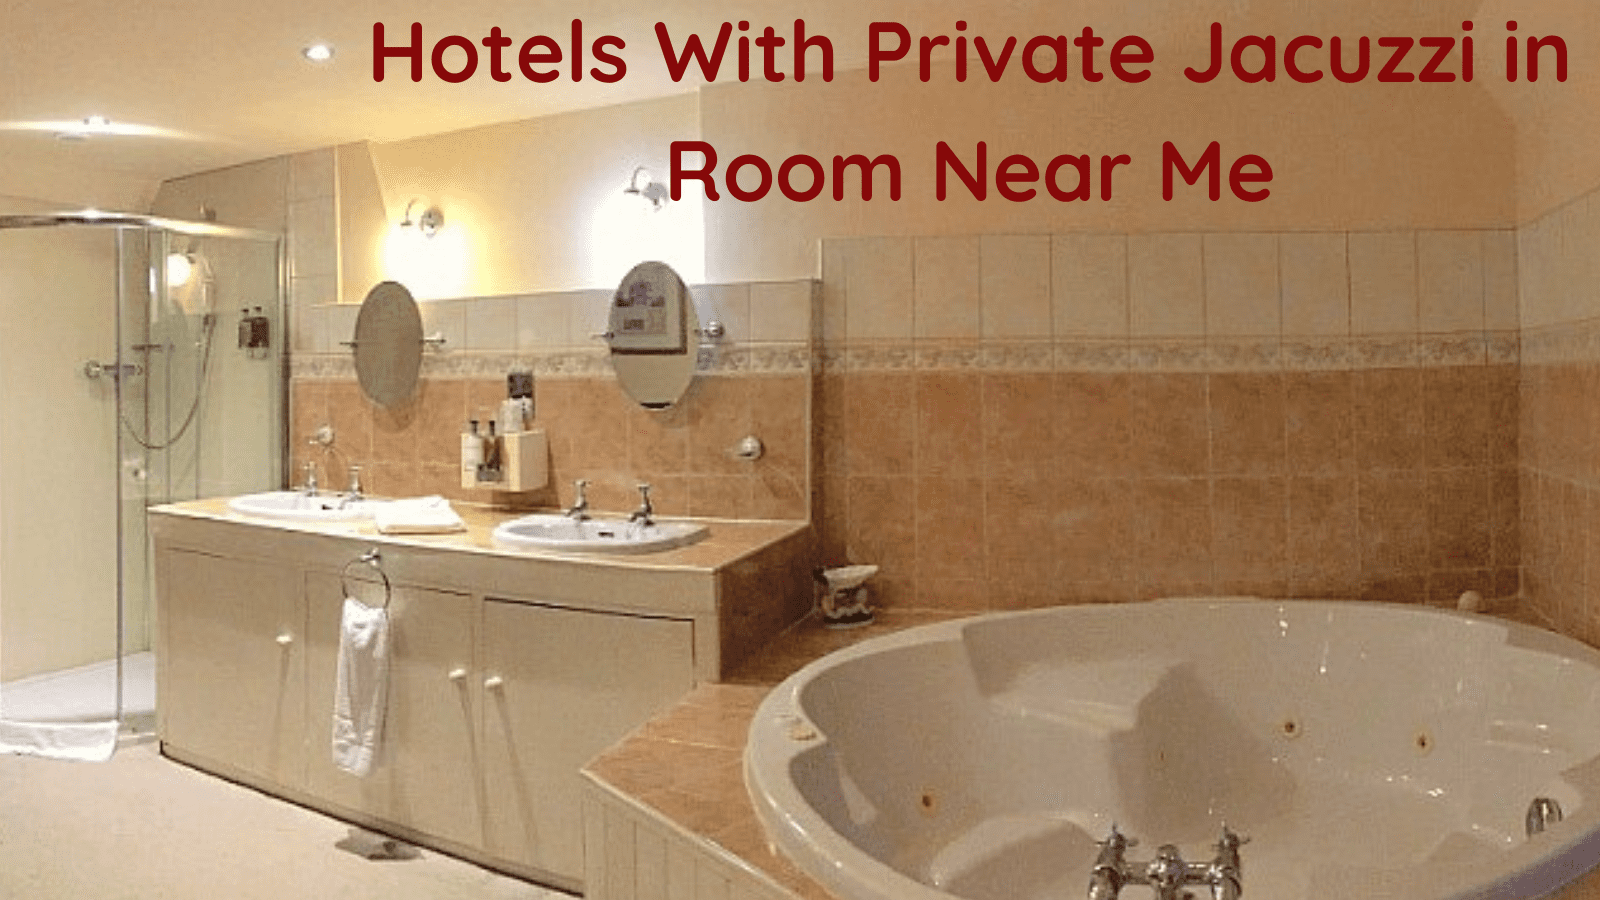 Hotels With Private Jacuzzi In Room Near Me 